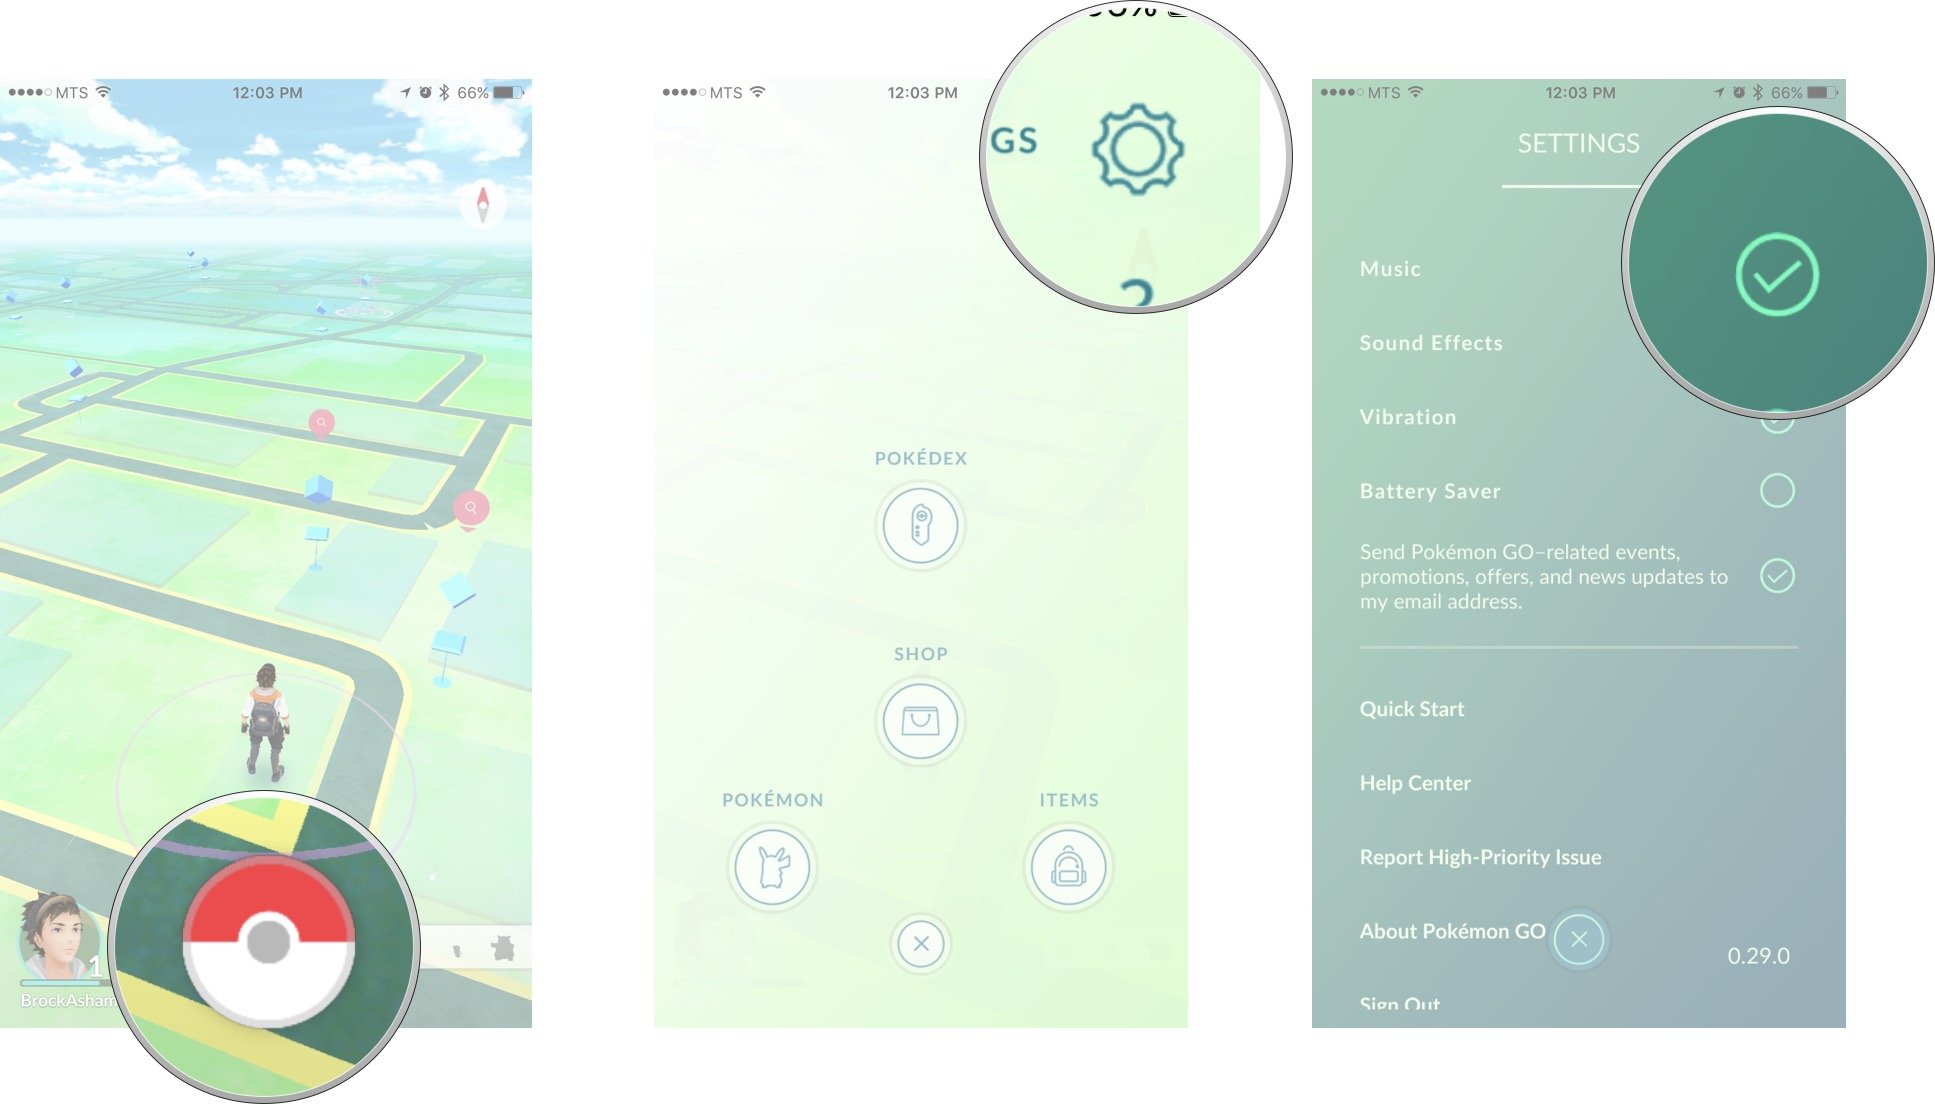 PokÃ©mon Go Android settings you need to know